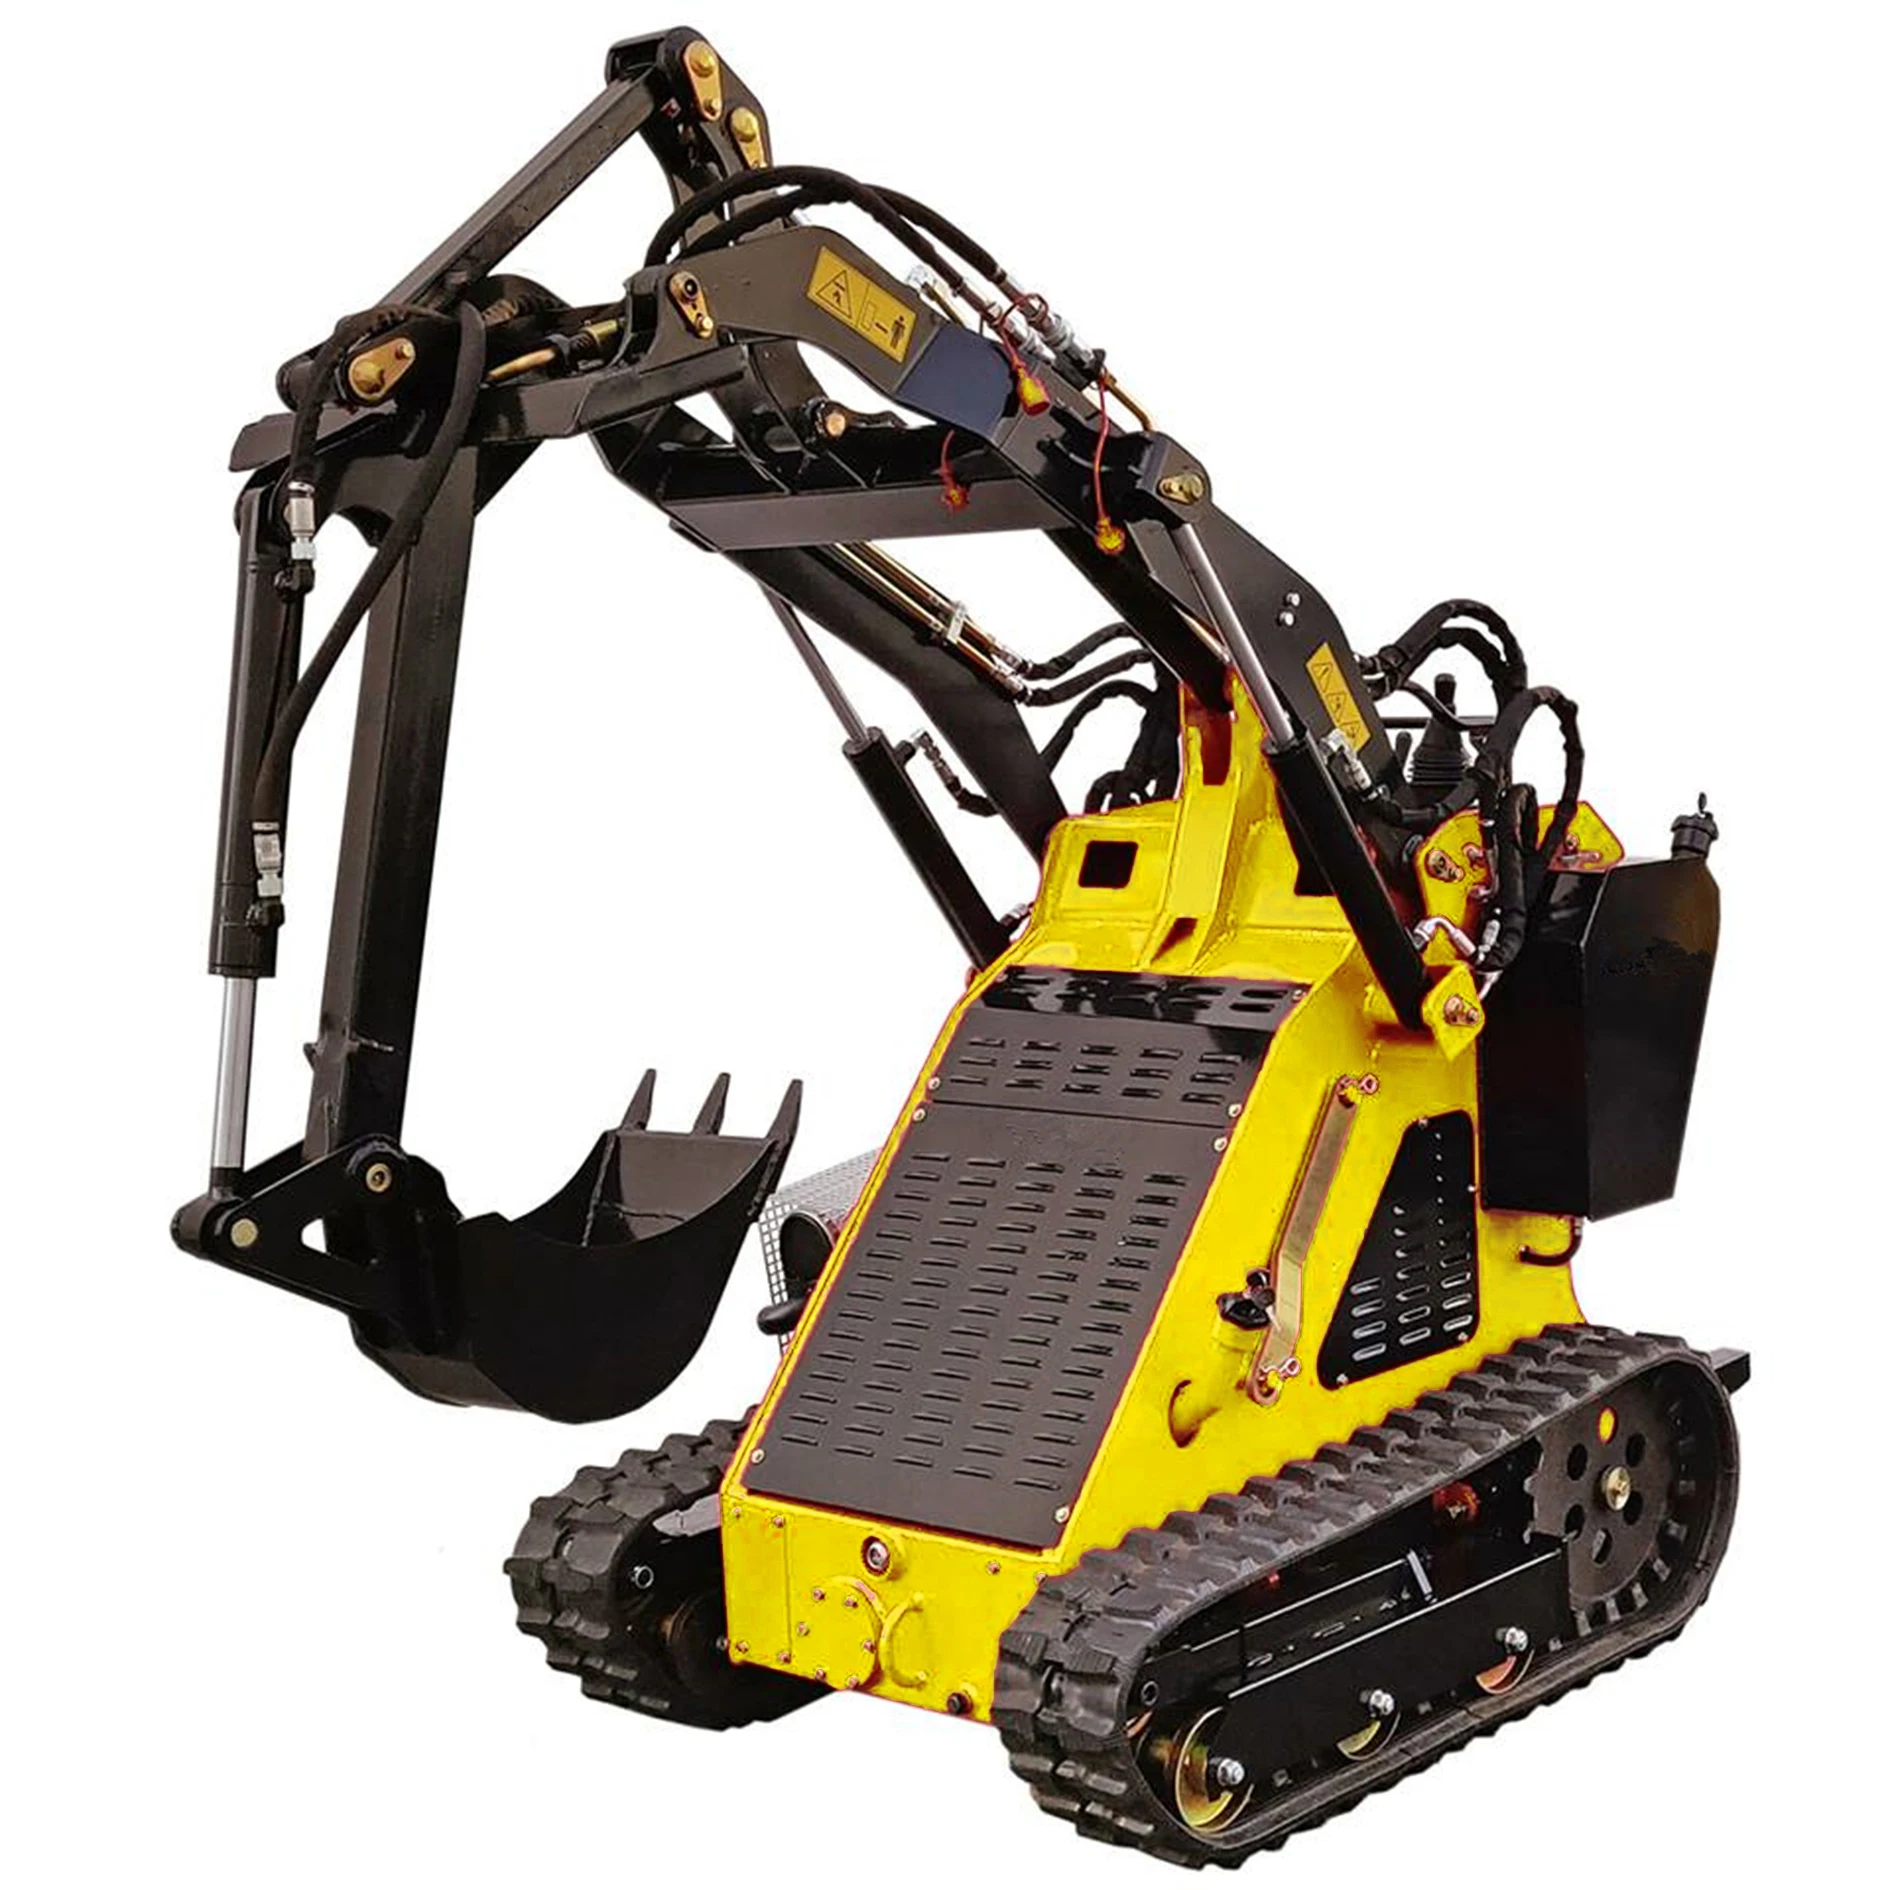 MMT80 stand-on compact loader mini skid steer for sale